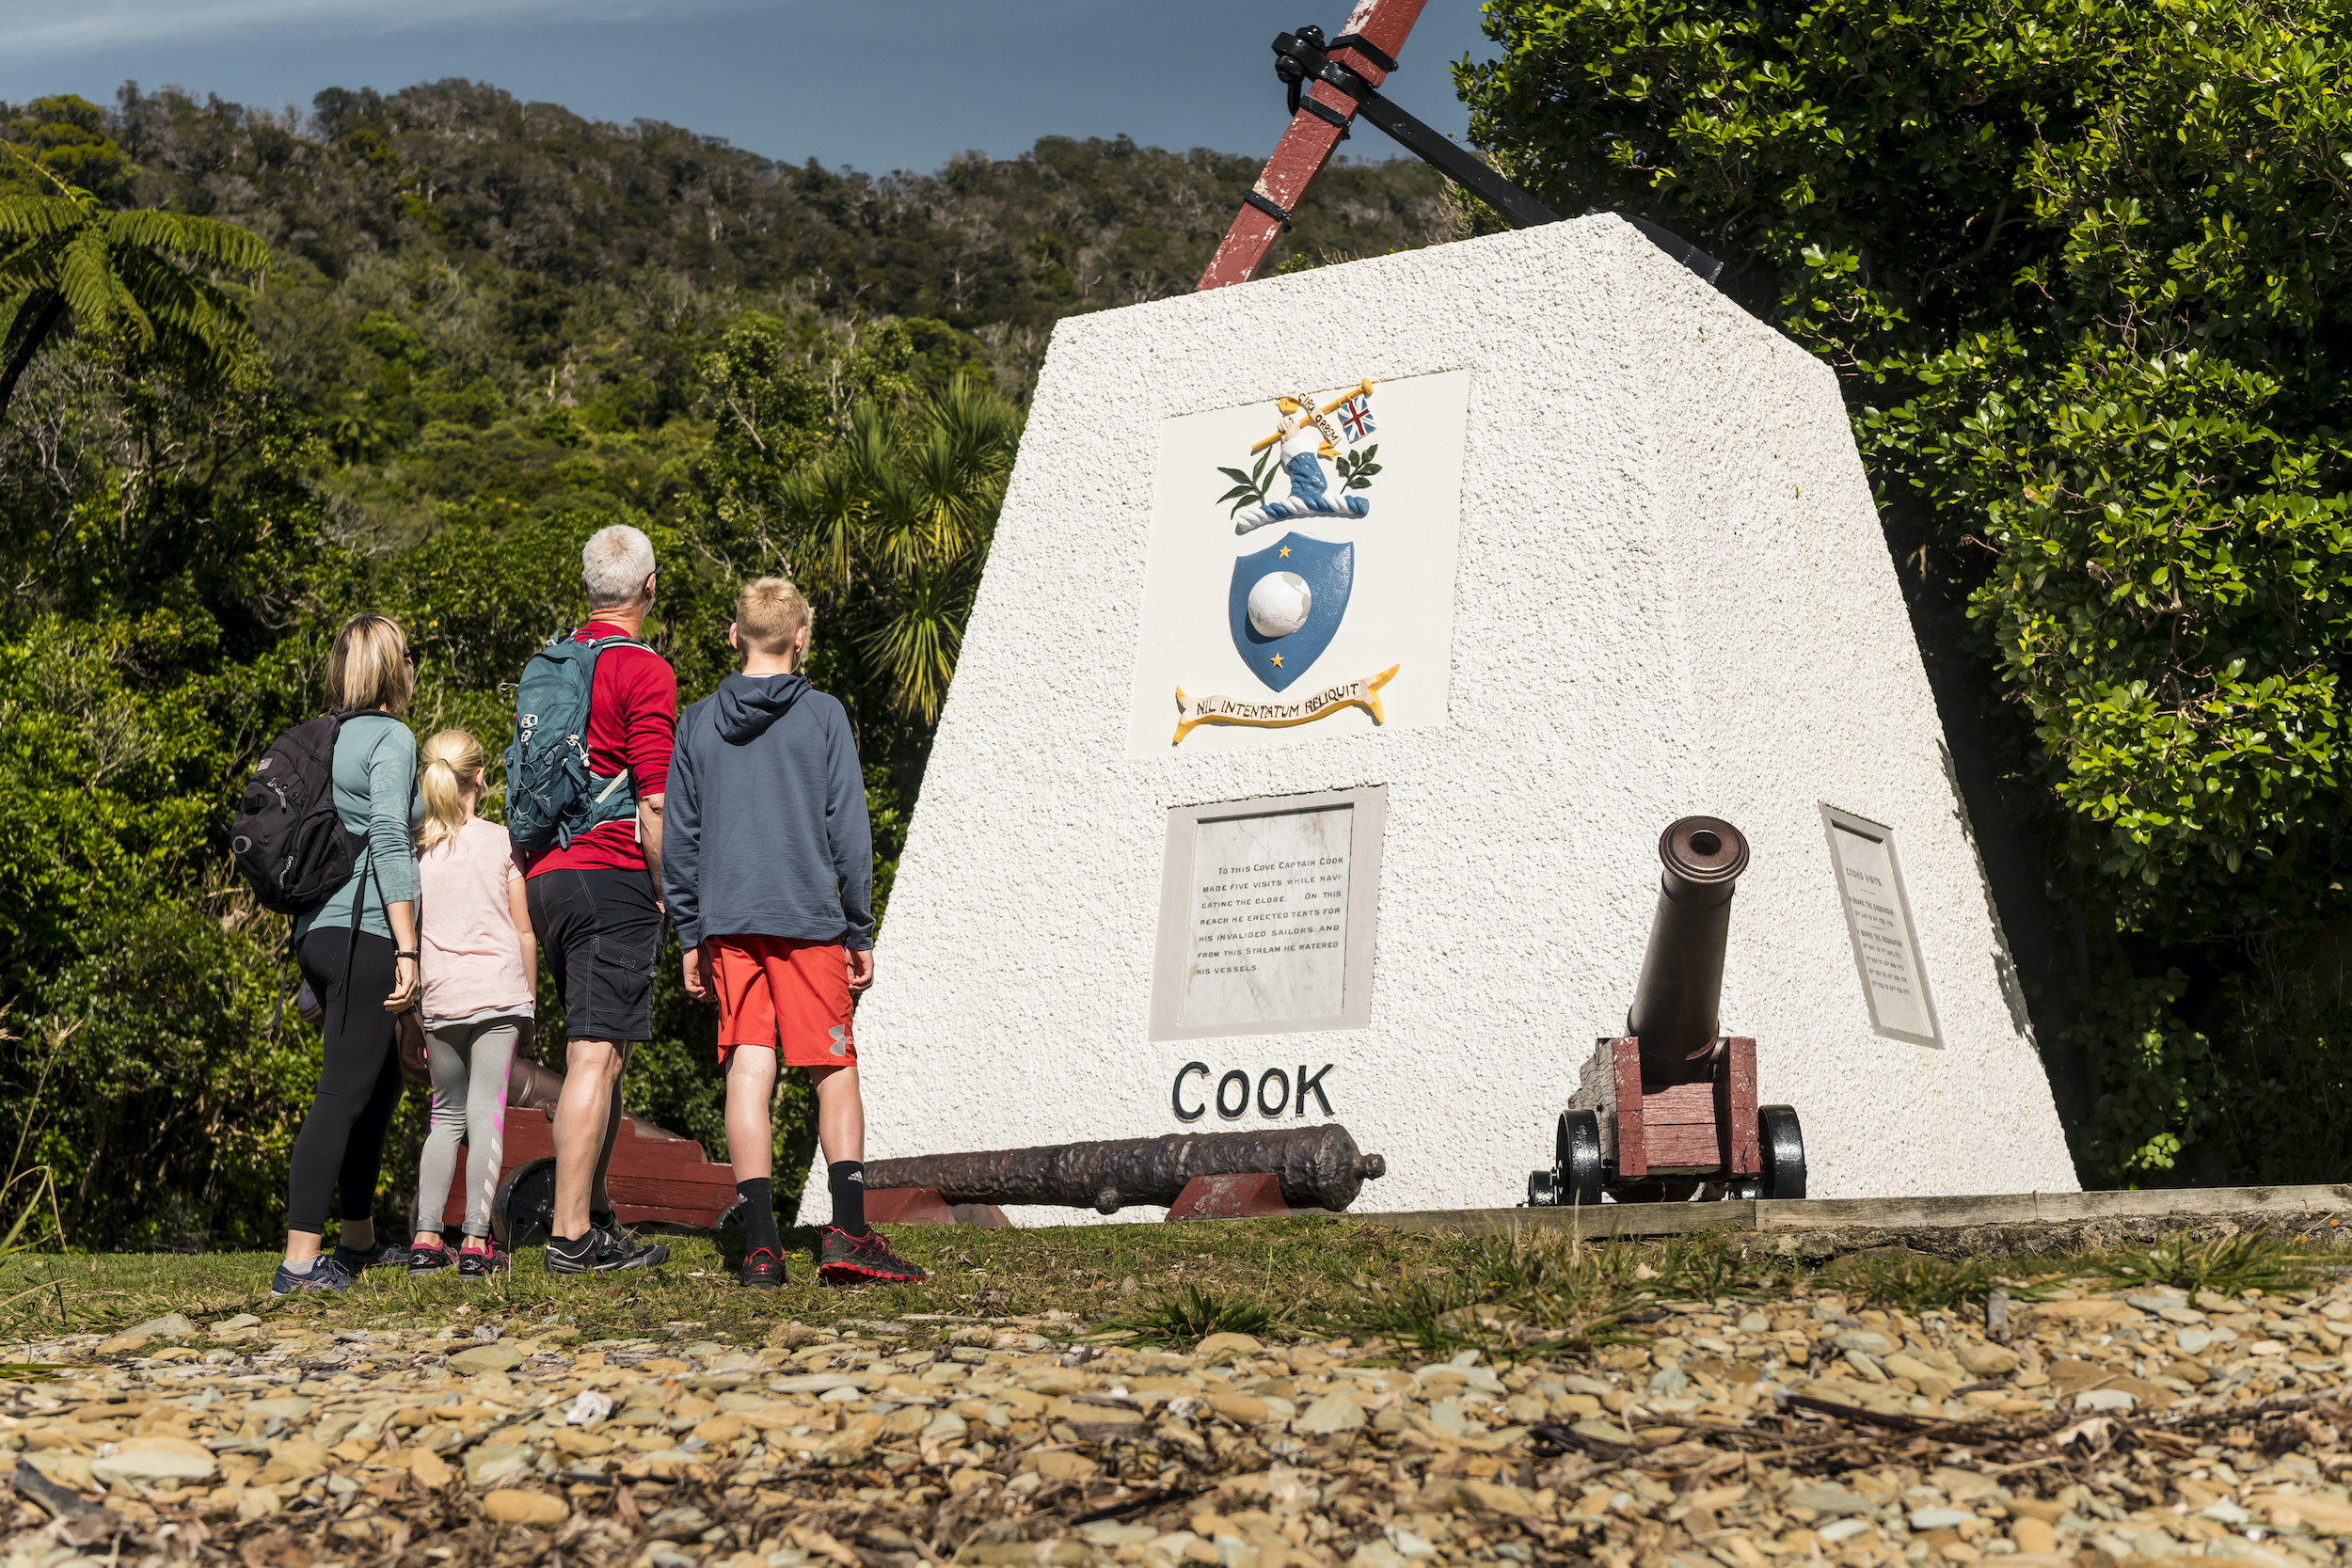 Four people look at the monument to Captain James Cook at Ship Cove/Meretoto in the Marlborough Sounds, New Zealand.